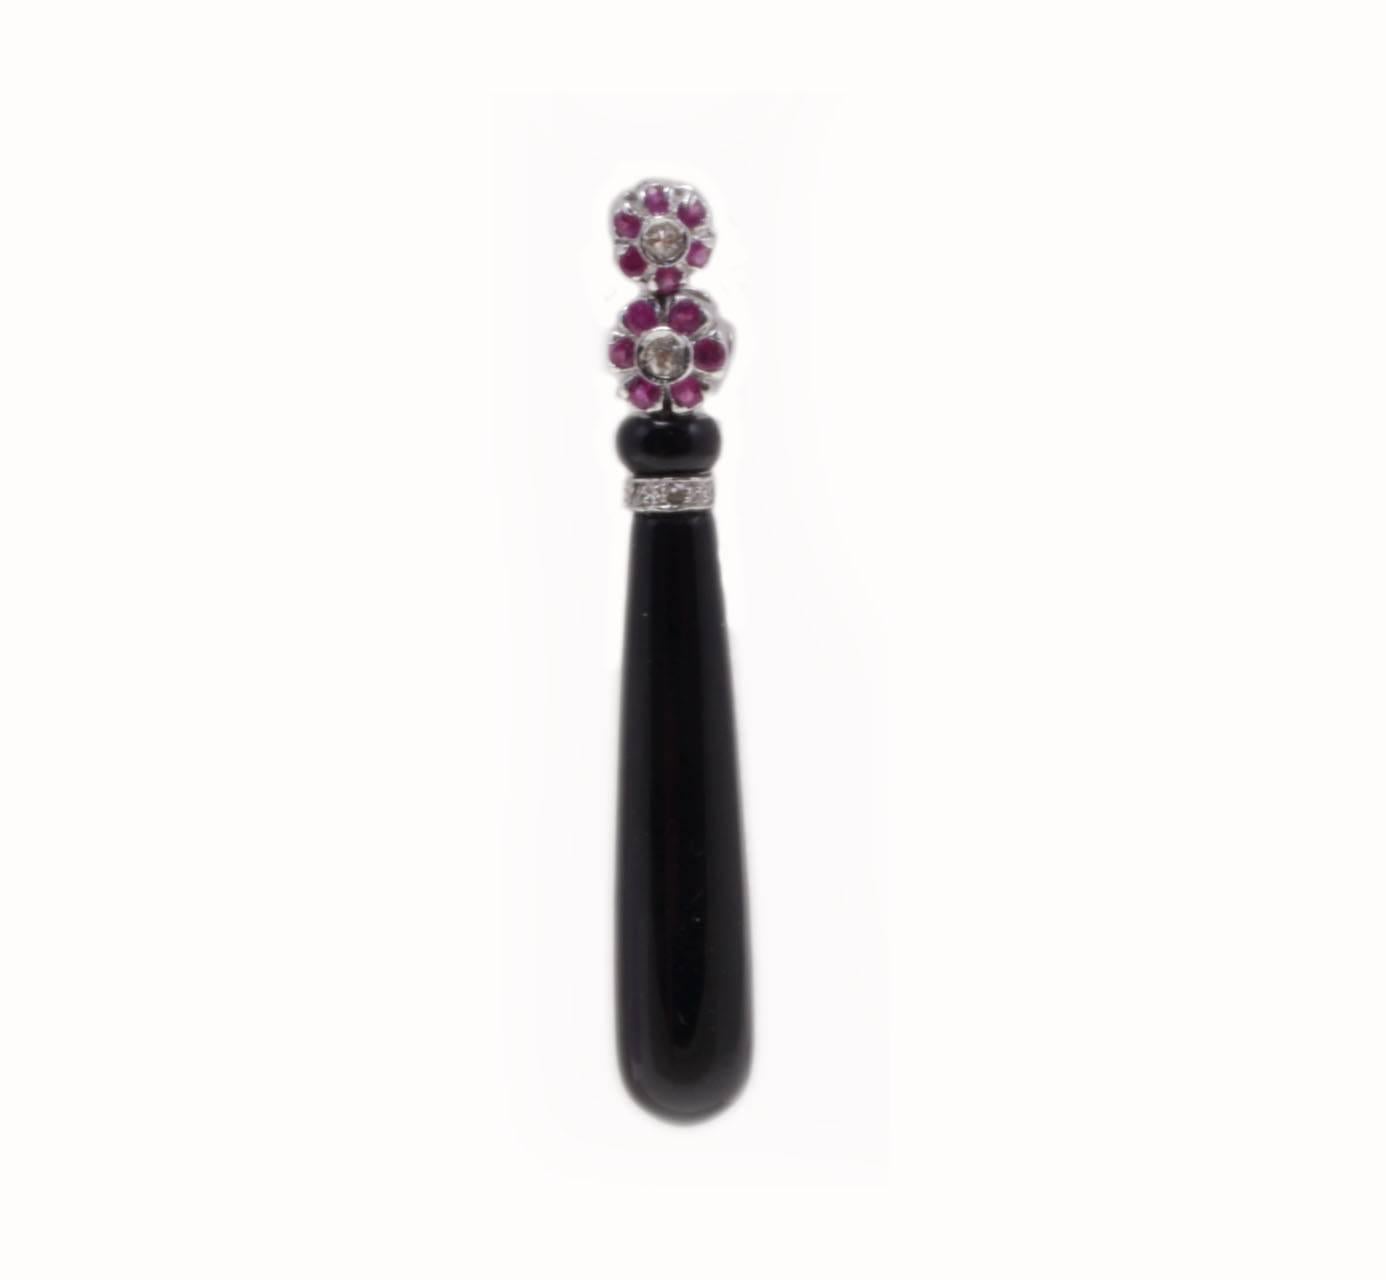 Charming drop earrings composed of little flowers of diamonds and rubies on top of a drop of onyx, all is settled in 14K white gold.
Tot weight both earrings 6.2 g, single one 3.1 g
Diamonds 0.25 ct
Rubies 0.55 ct
Onyx 4.20 g

Rf. eia